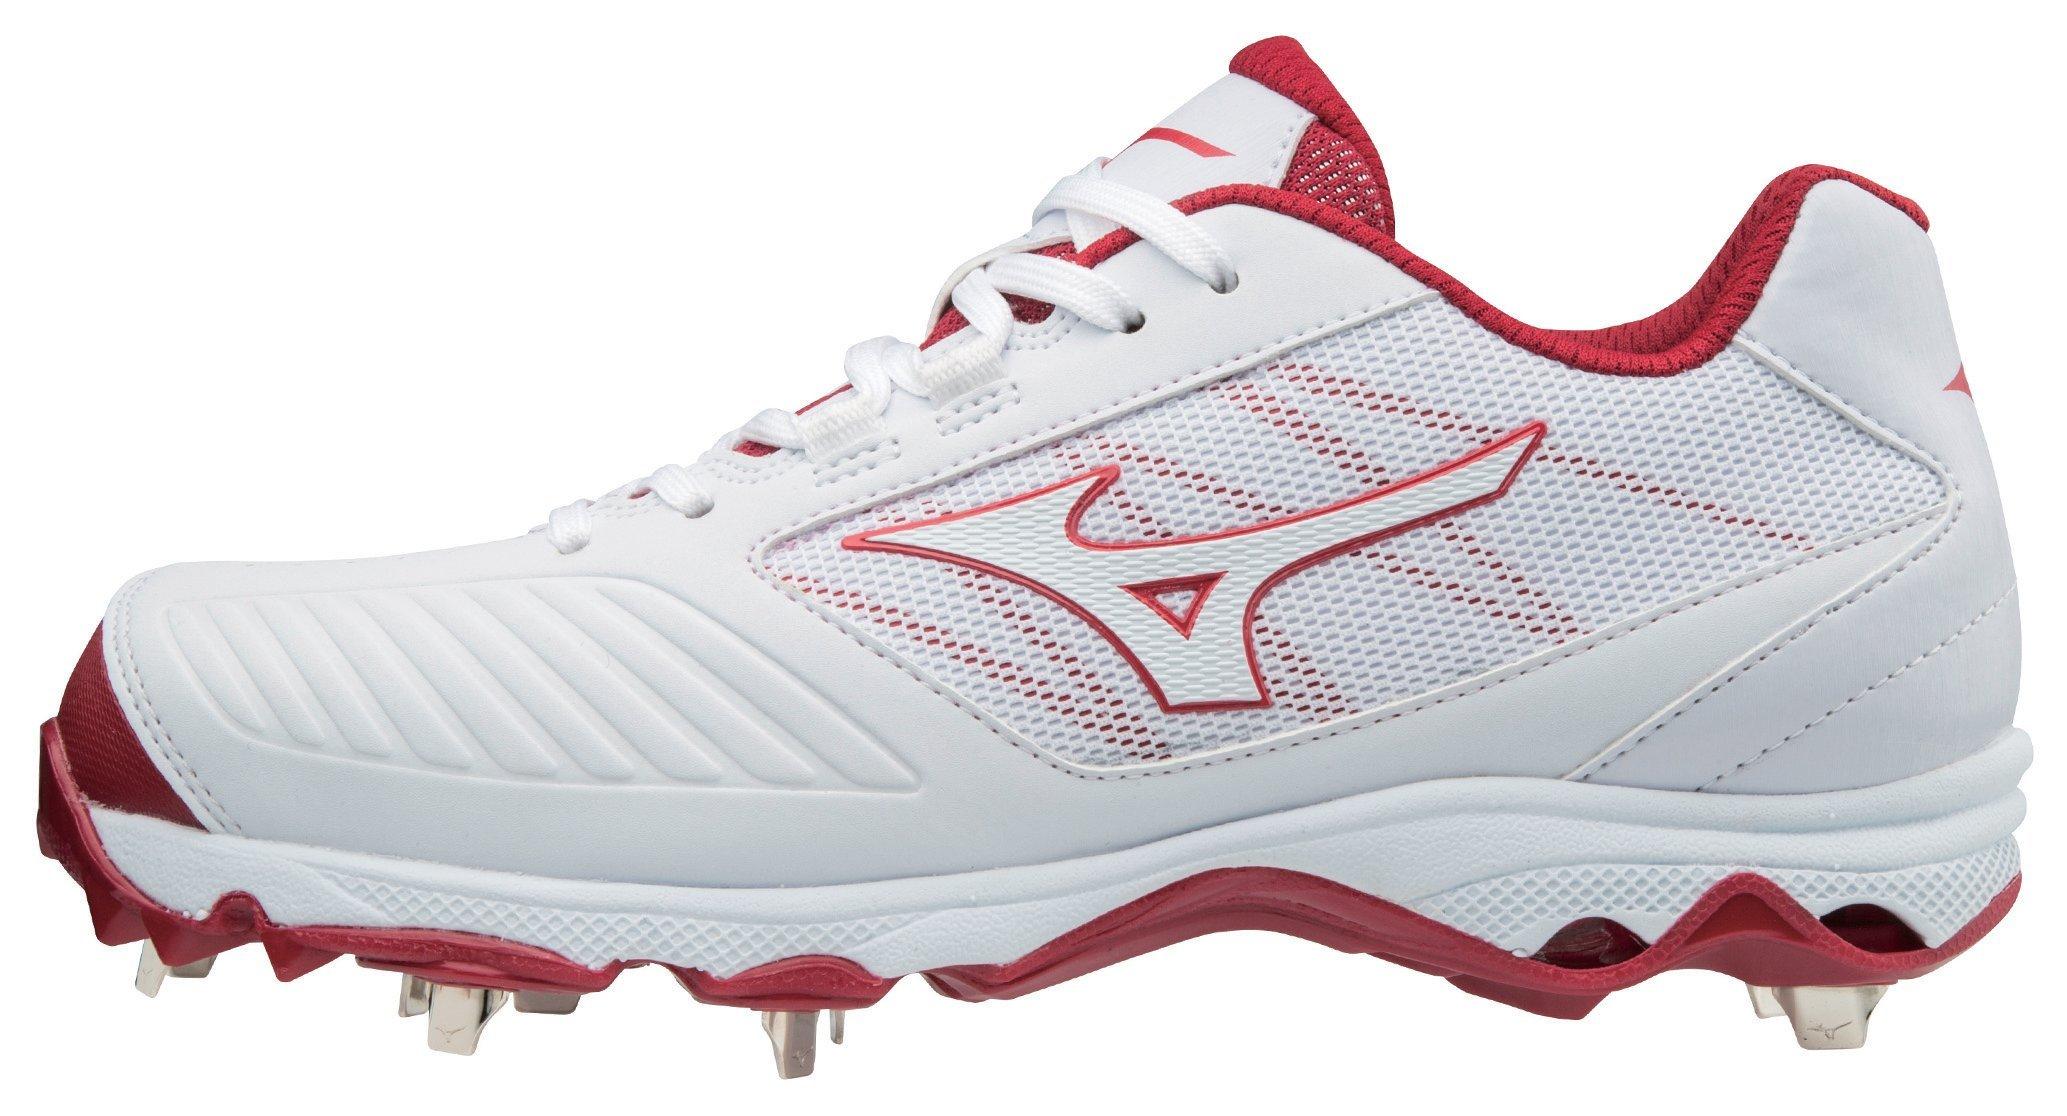 mizuno red cleats for softball